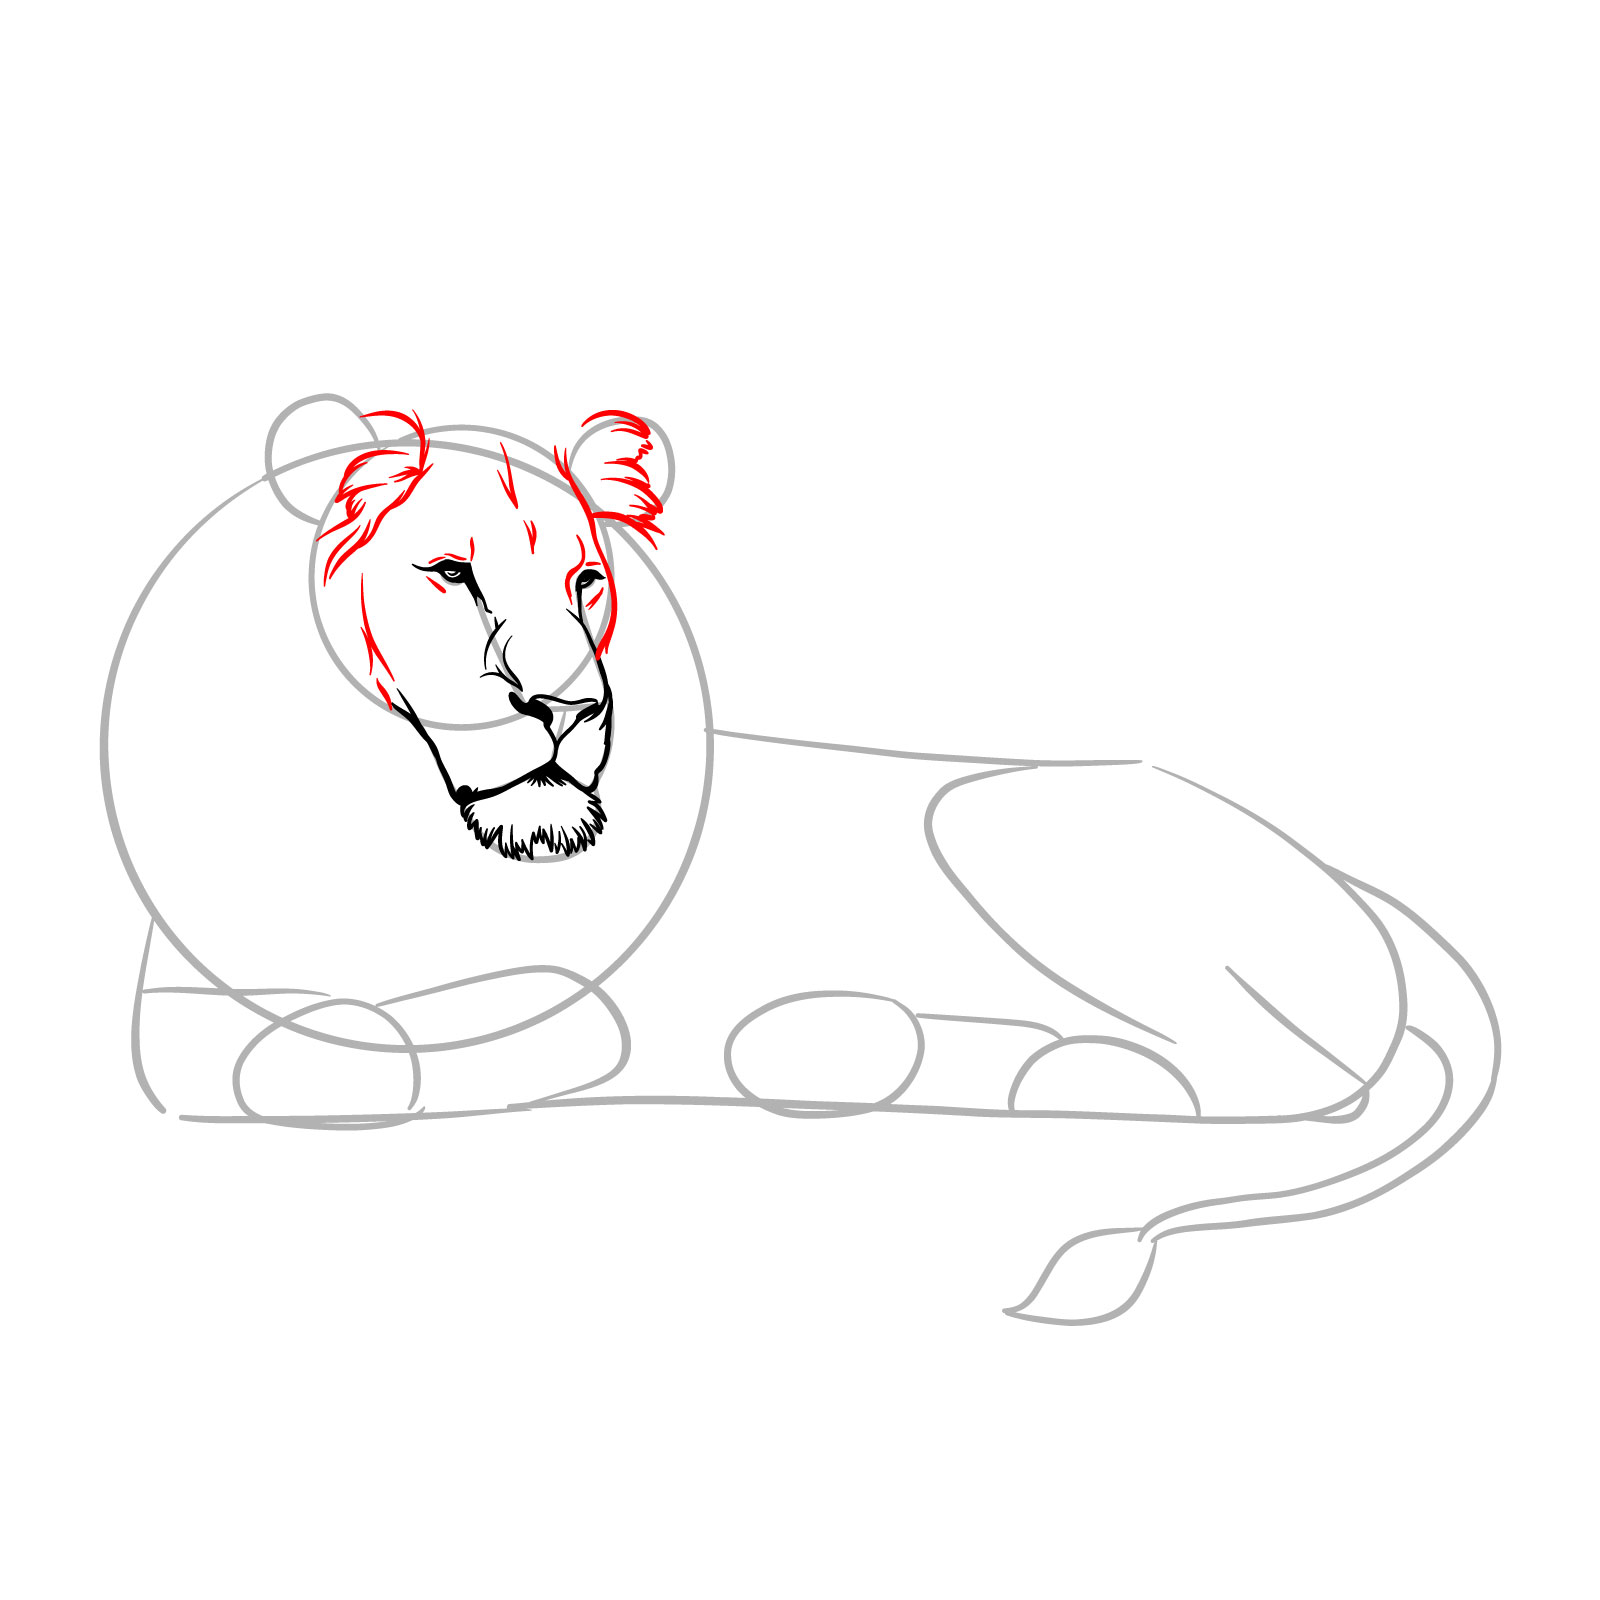 Lying lion drawing - Step 6: Adding ear fur and facial details - step 06